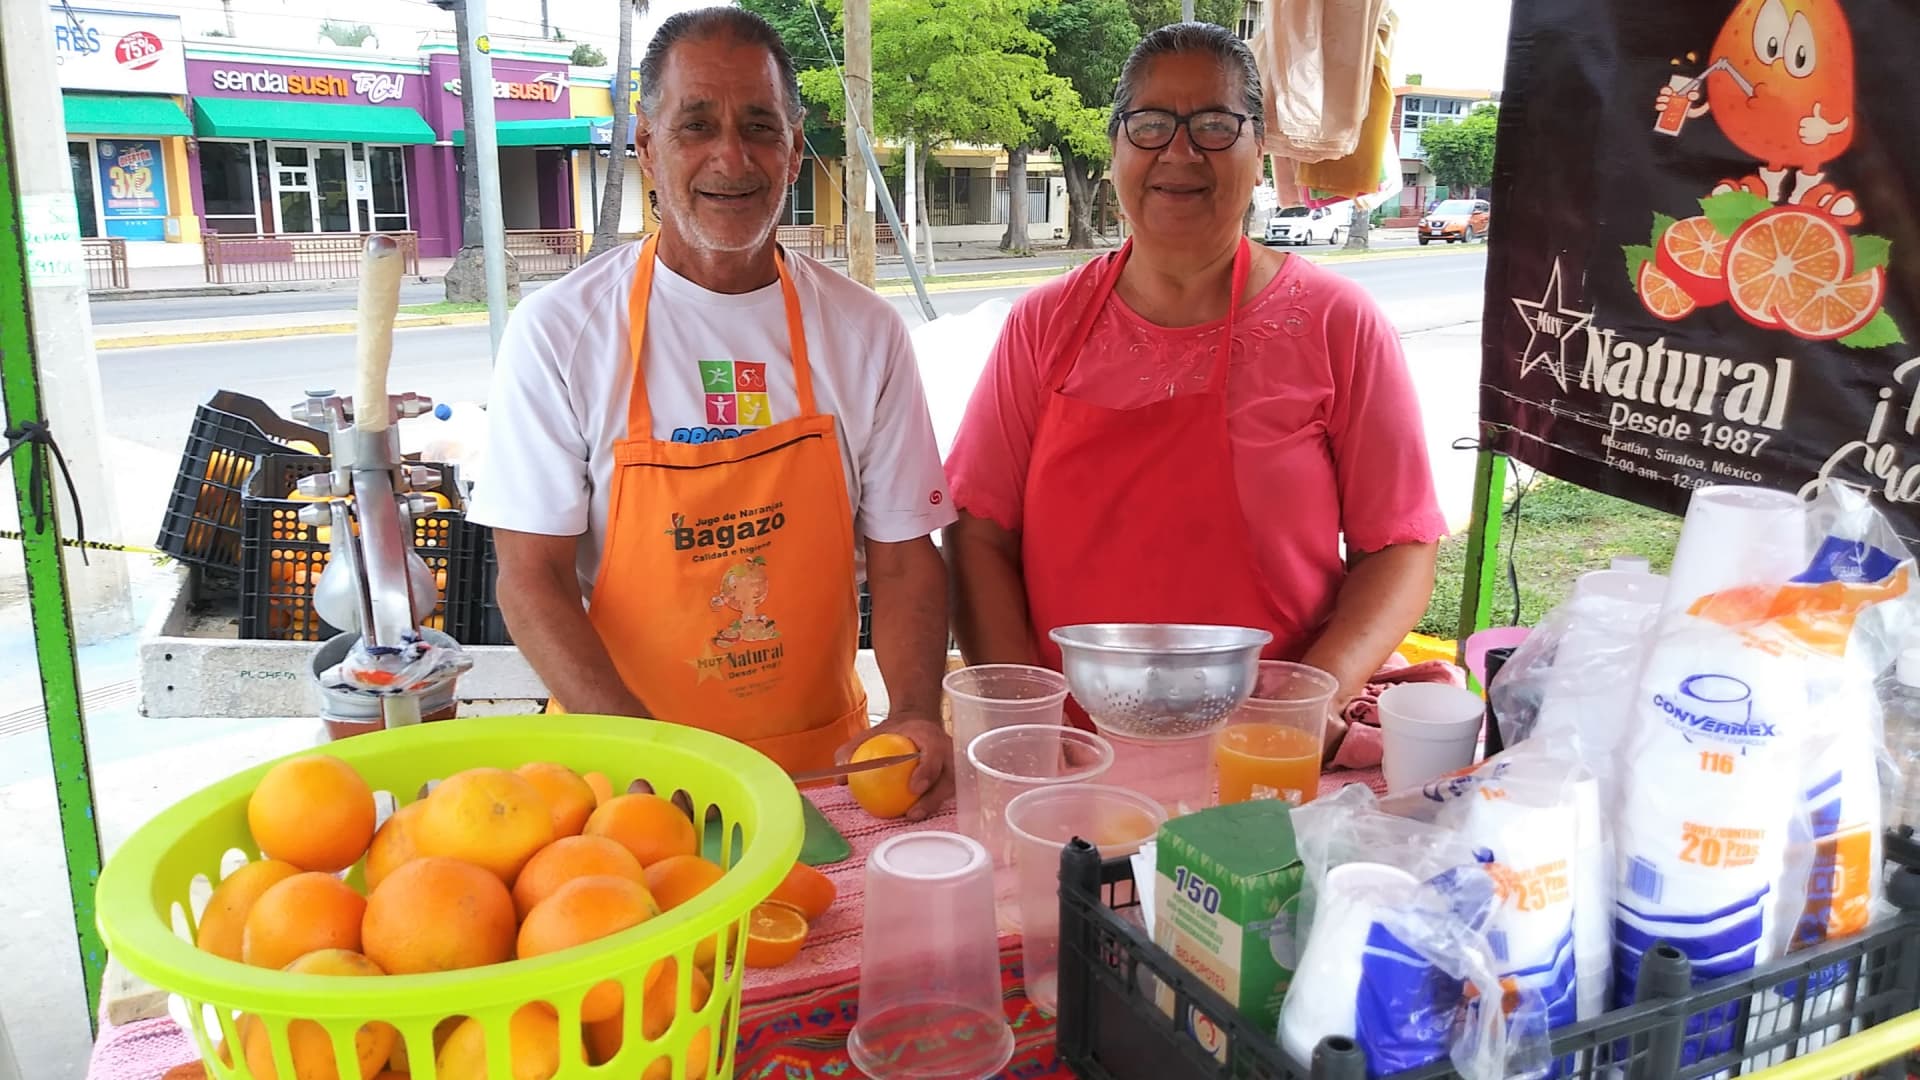 For 45 years, Maria Guadalupe and Antonio have been squeezing and selling fresh orange juice from their stand on this corner.